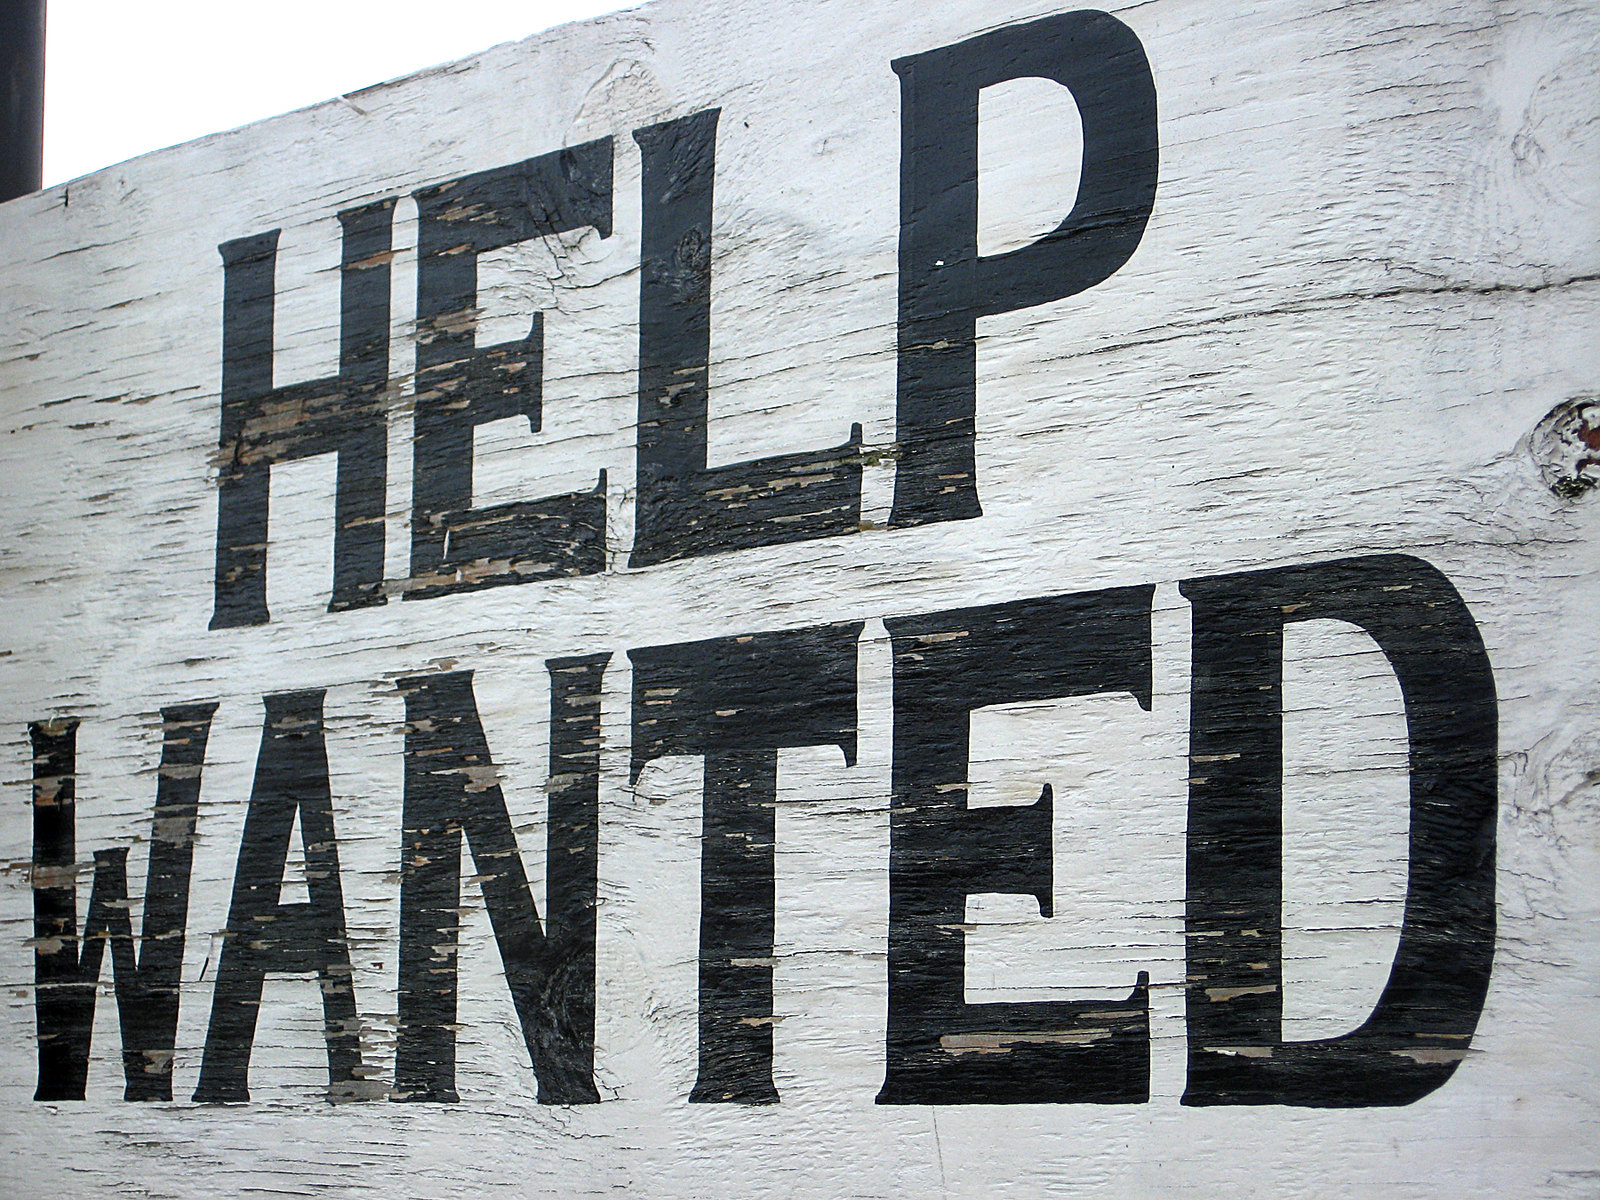 Photograph of a sign displaying the text "help wanted". Black letters painted on a white wooden background.